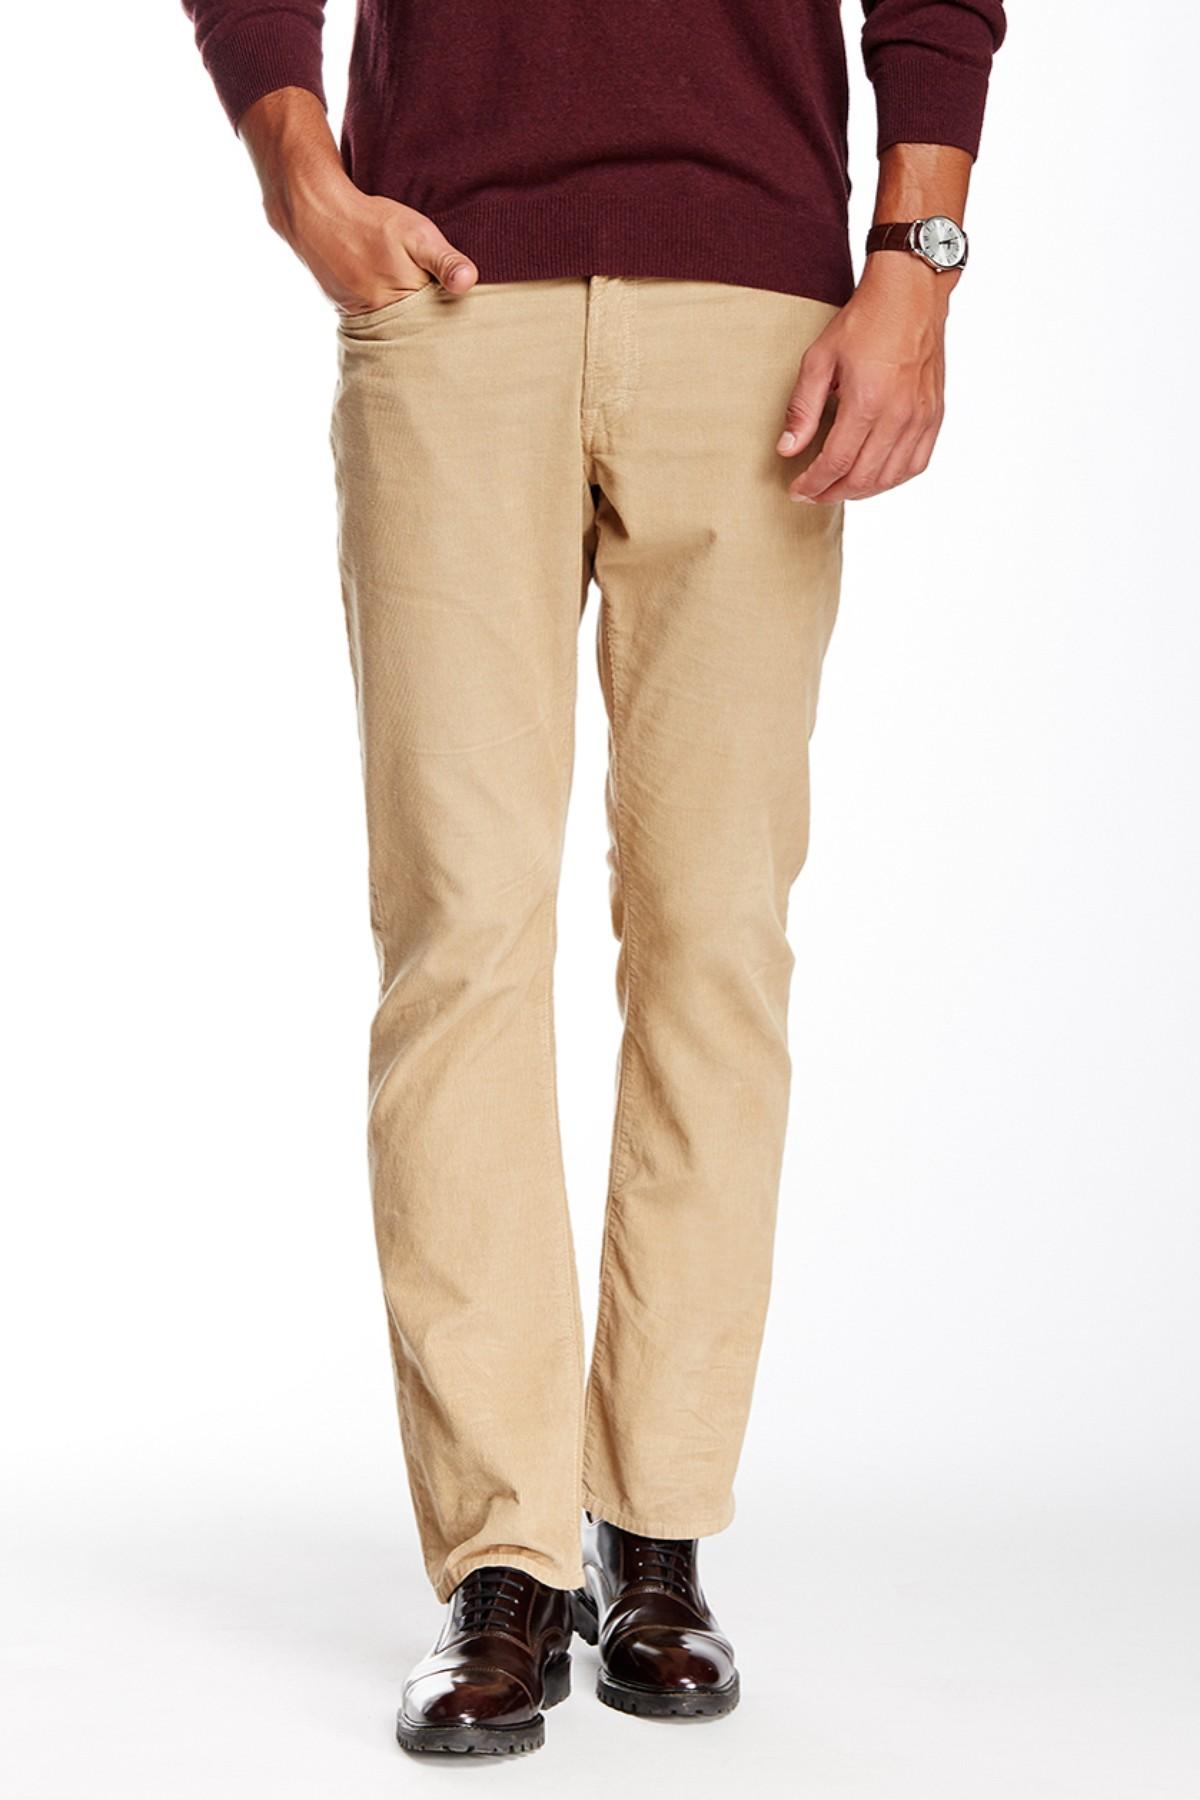 Lyst - Bonobos French Corders Straight Pant - 30-34 ...